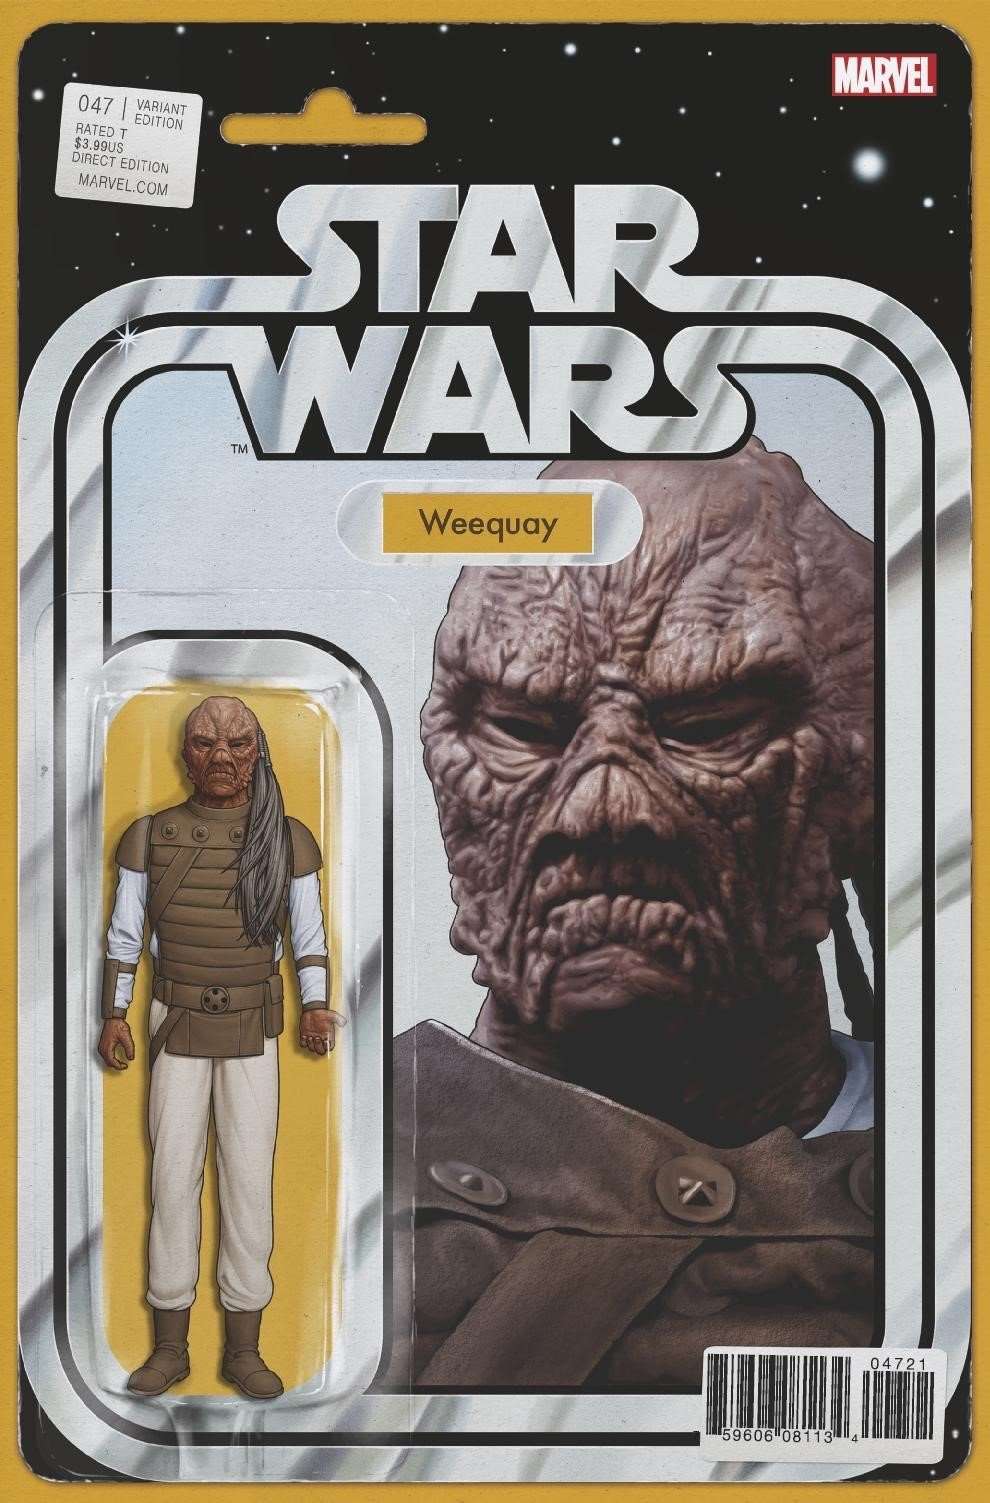 Star Wars #47 action figure variant, Weequay